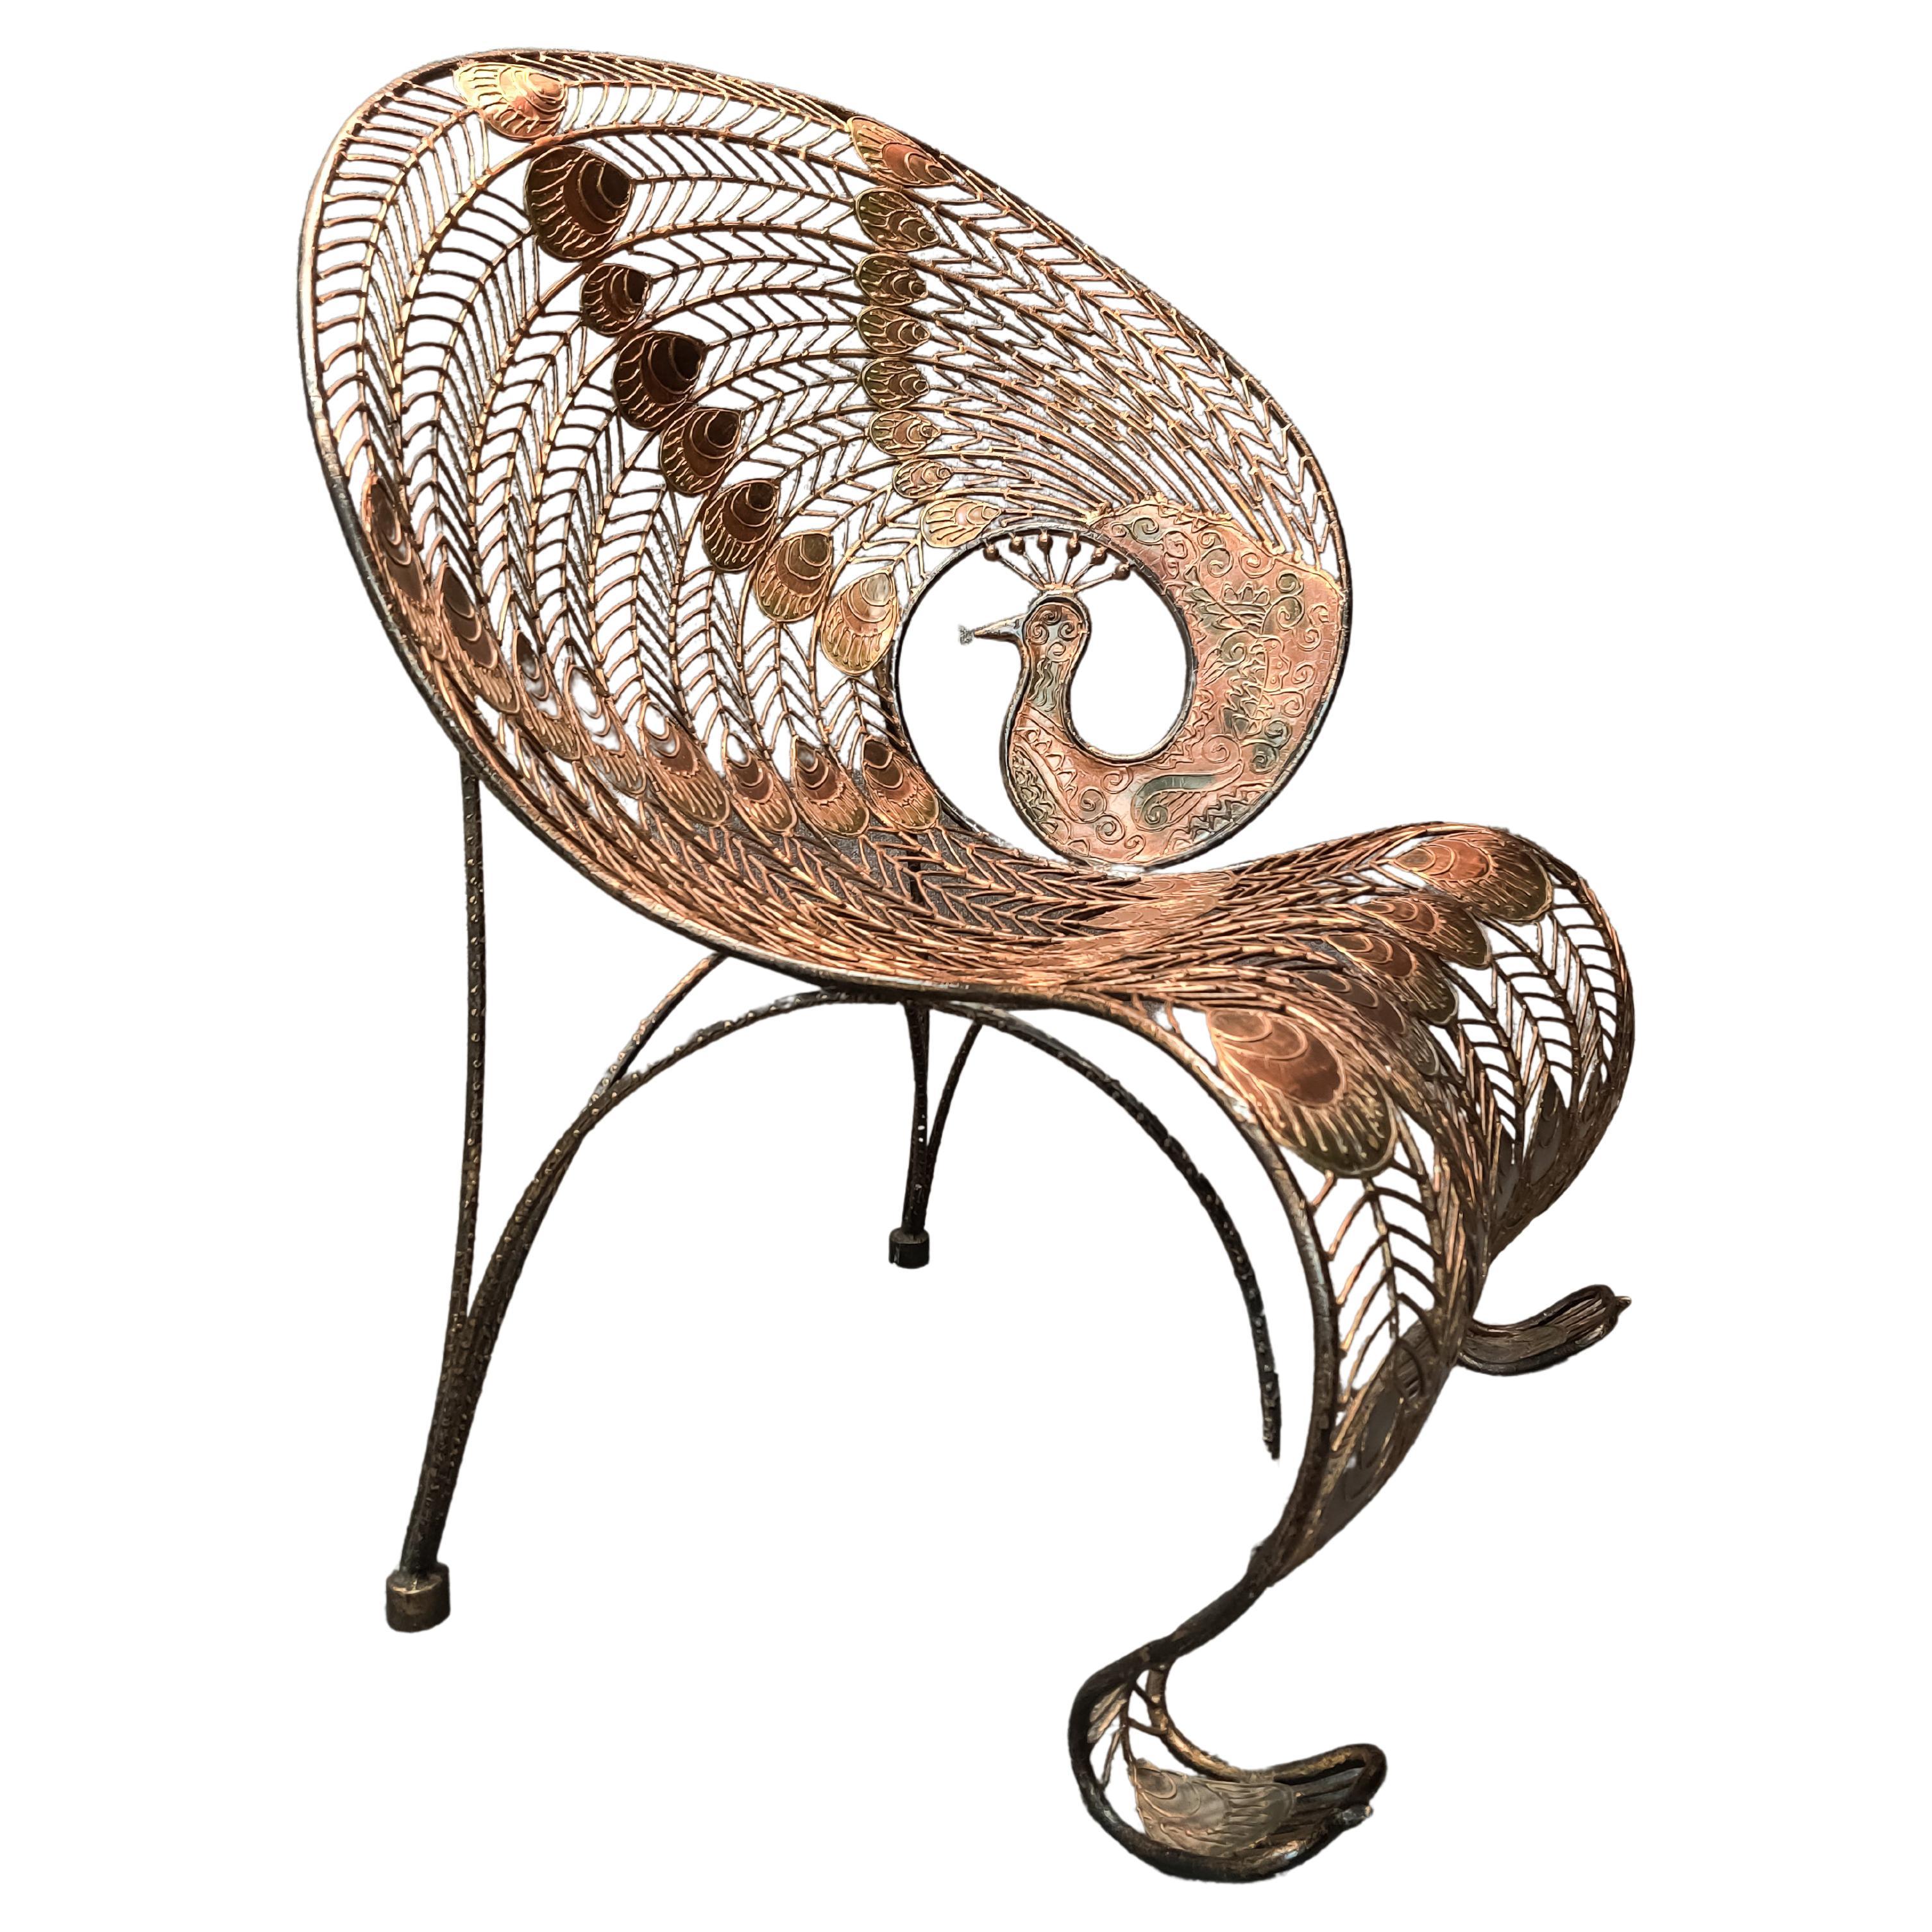 Large Wrought Iron Sculptural Peacock Chair Brutalist Mid-Century Inspired 